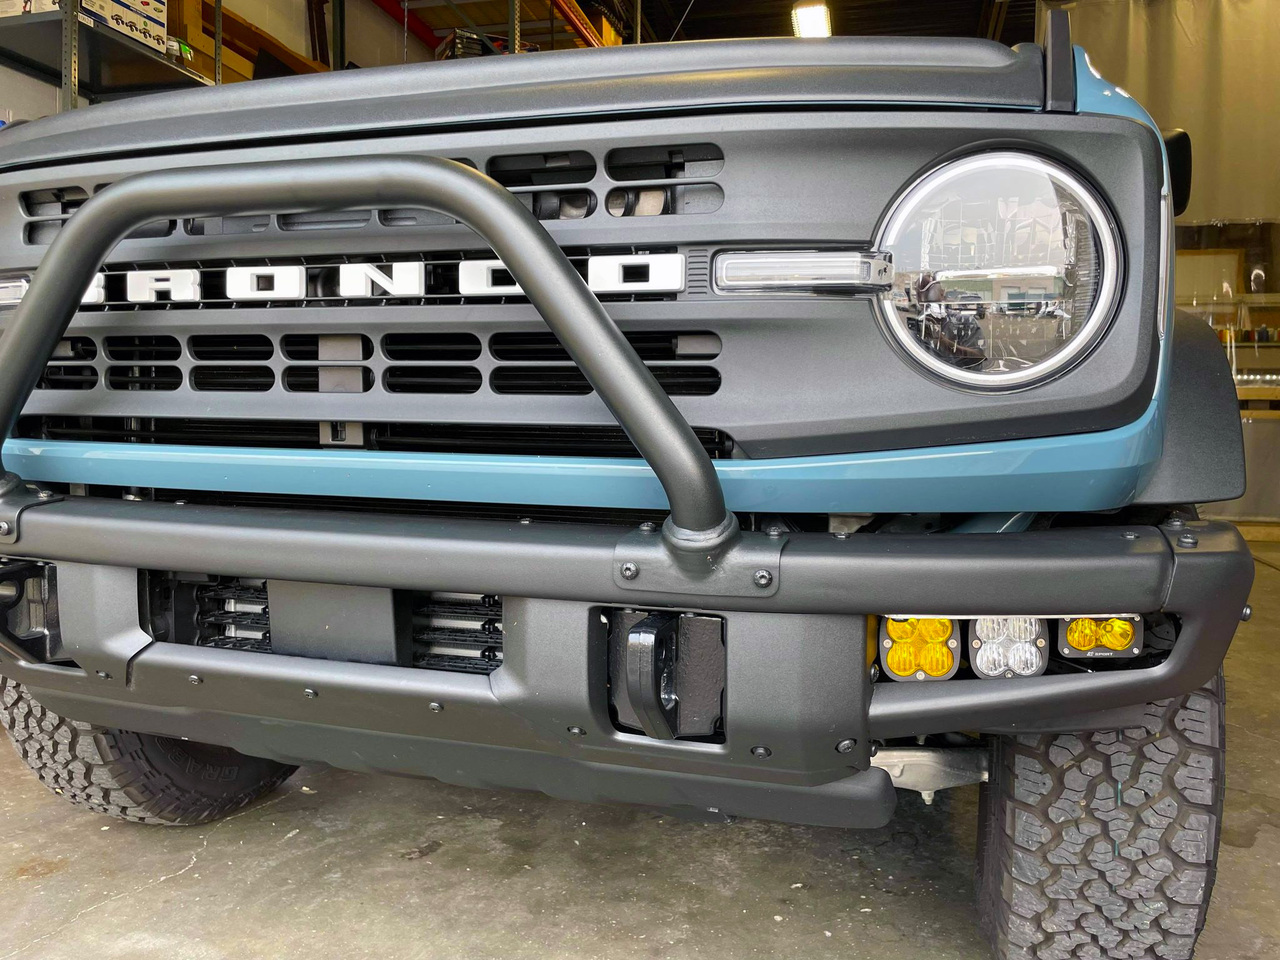 Ford Bronco Forum Discount from 4x4TruckLEDs.com - LED lighting specialists! 1633484062512